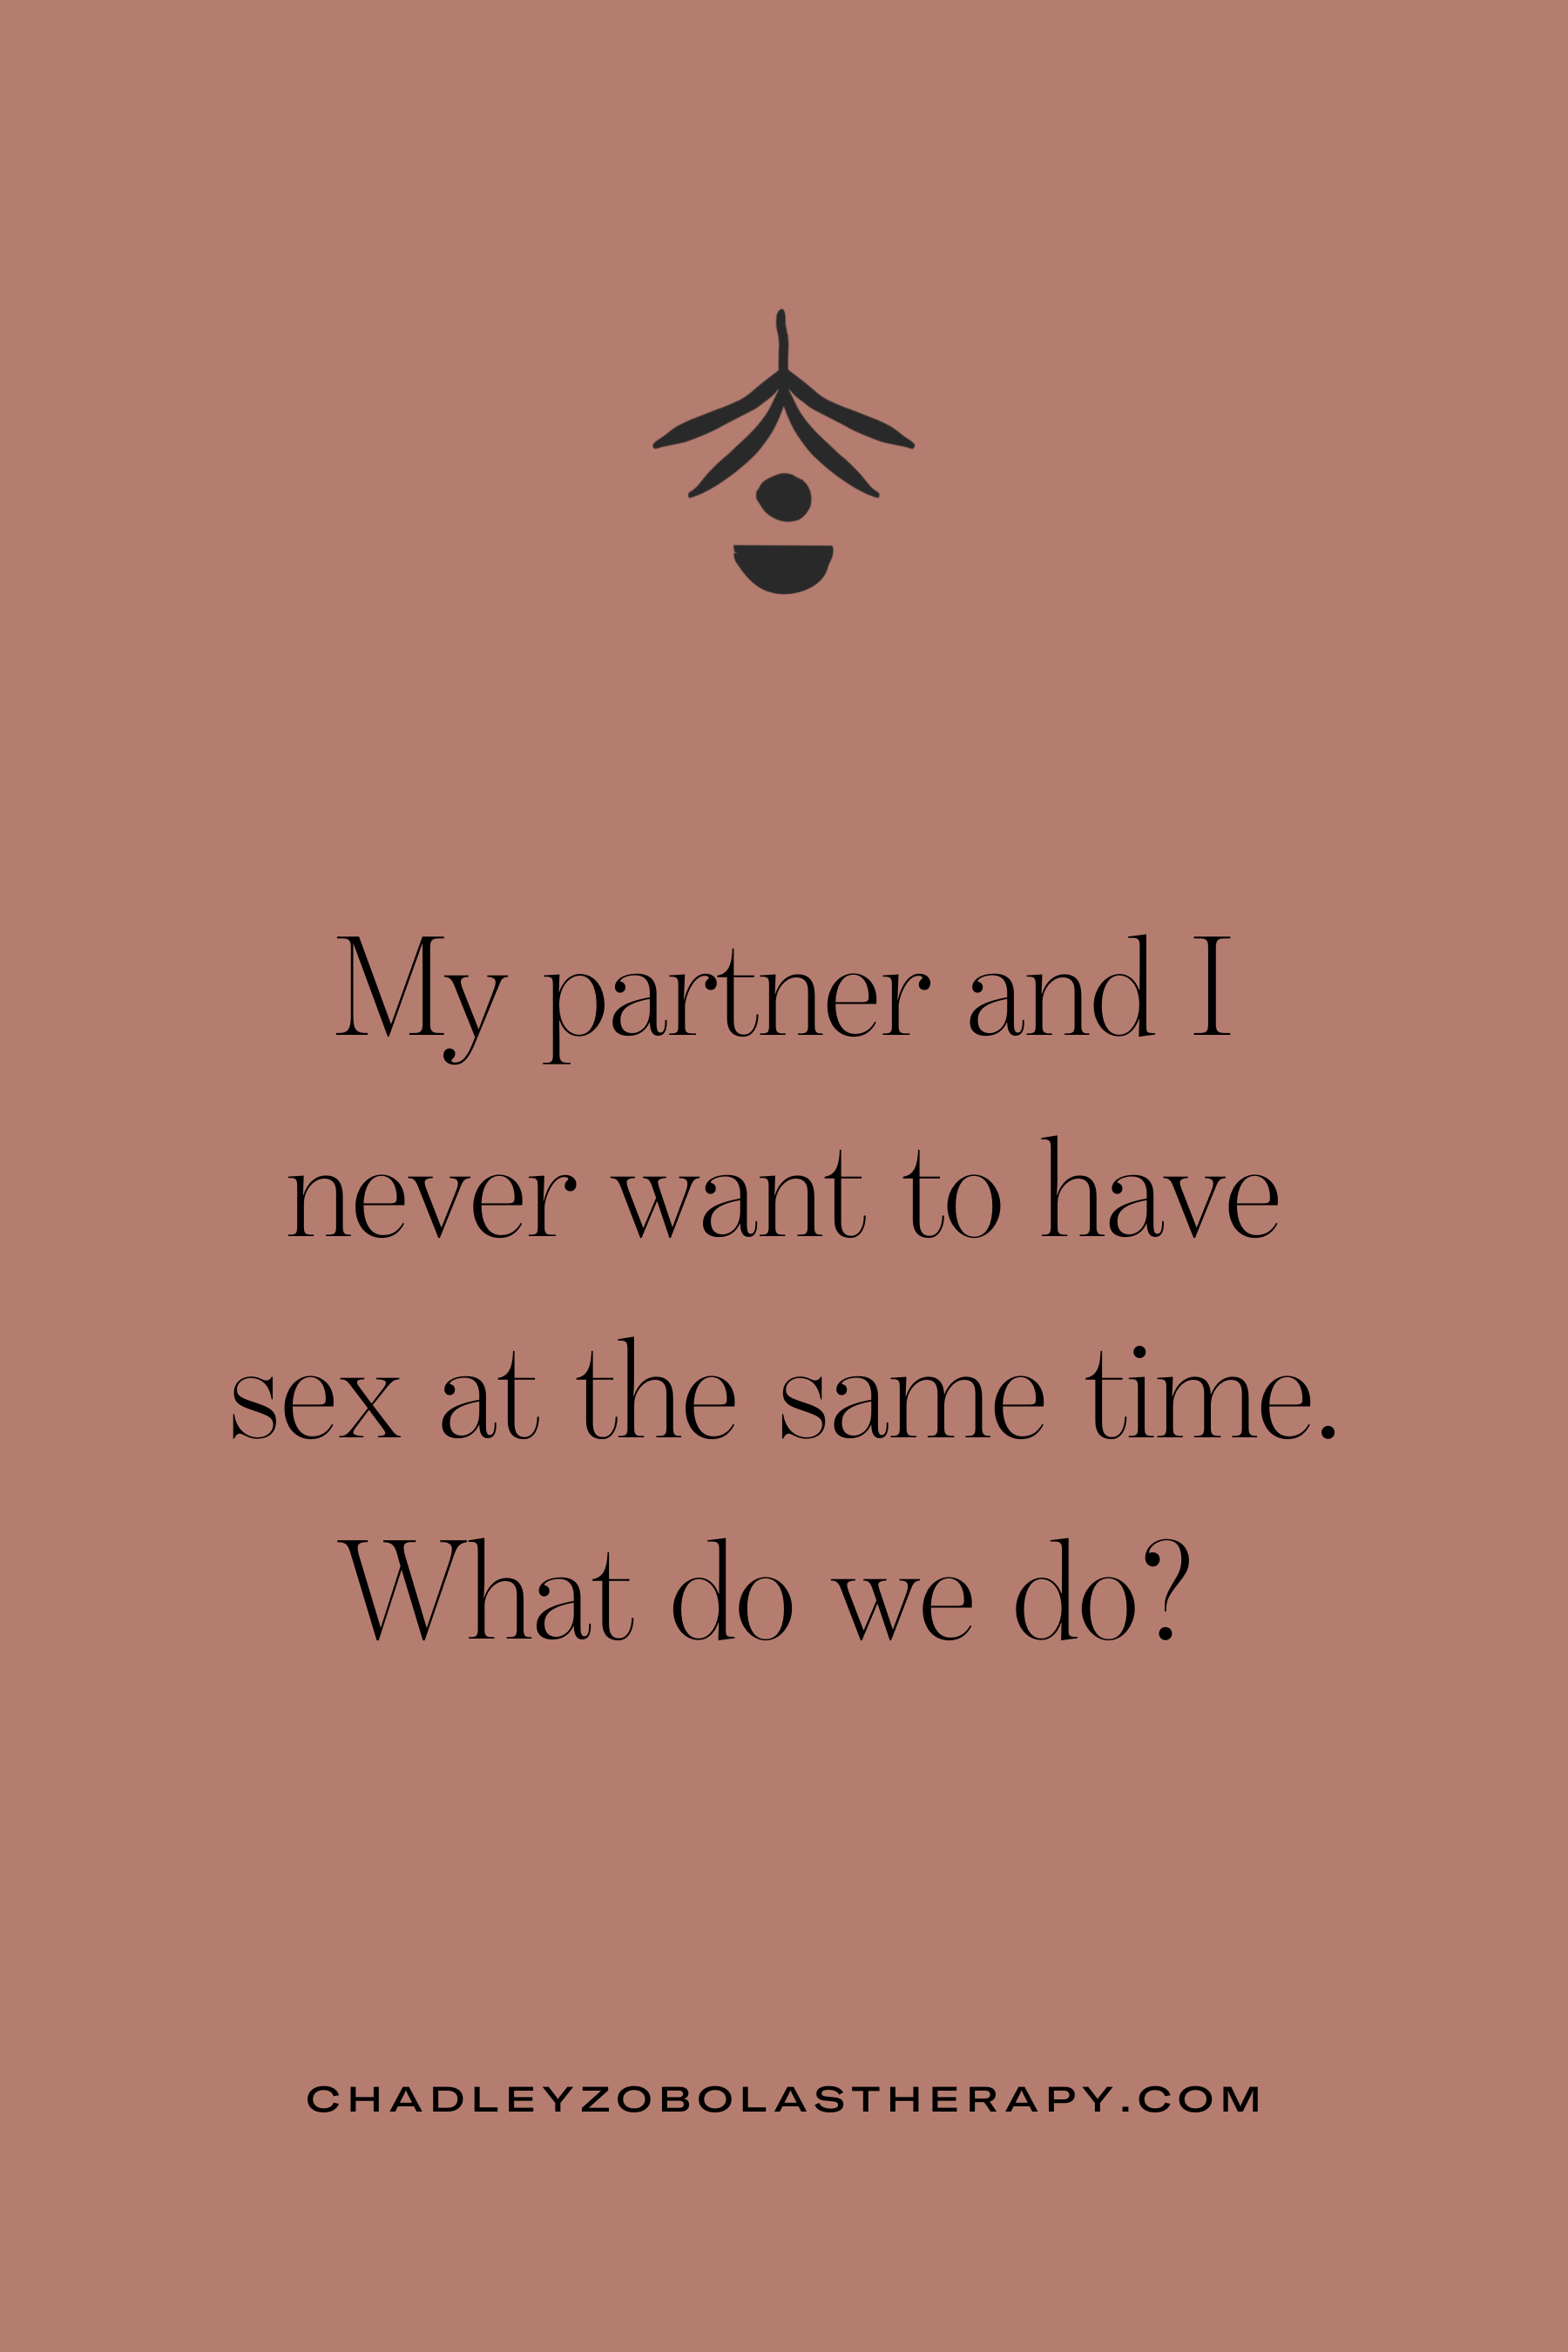 My partner and I never want to have sex at the same time pic